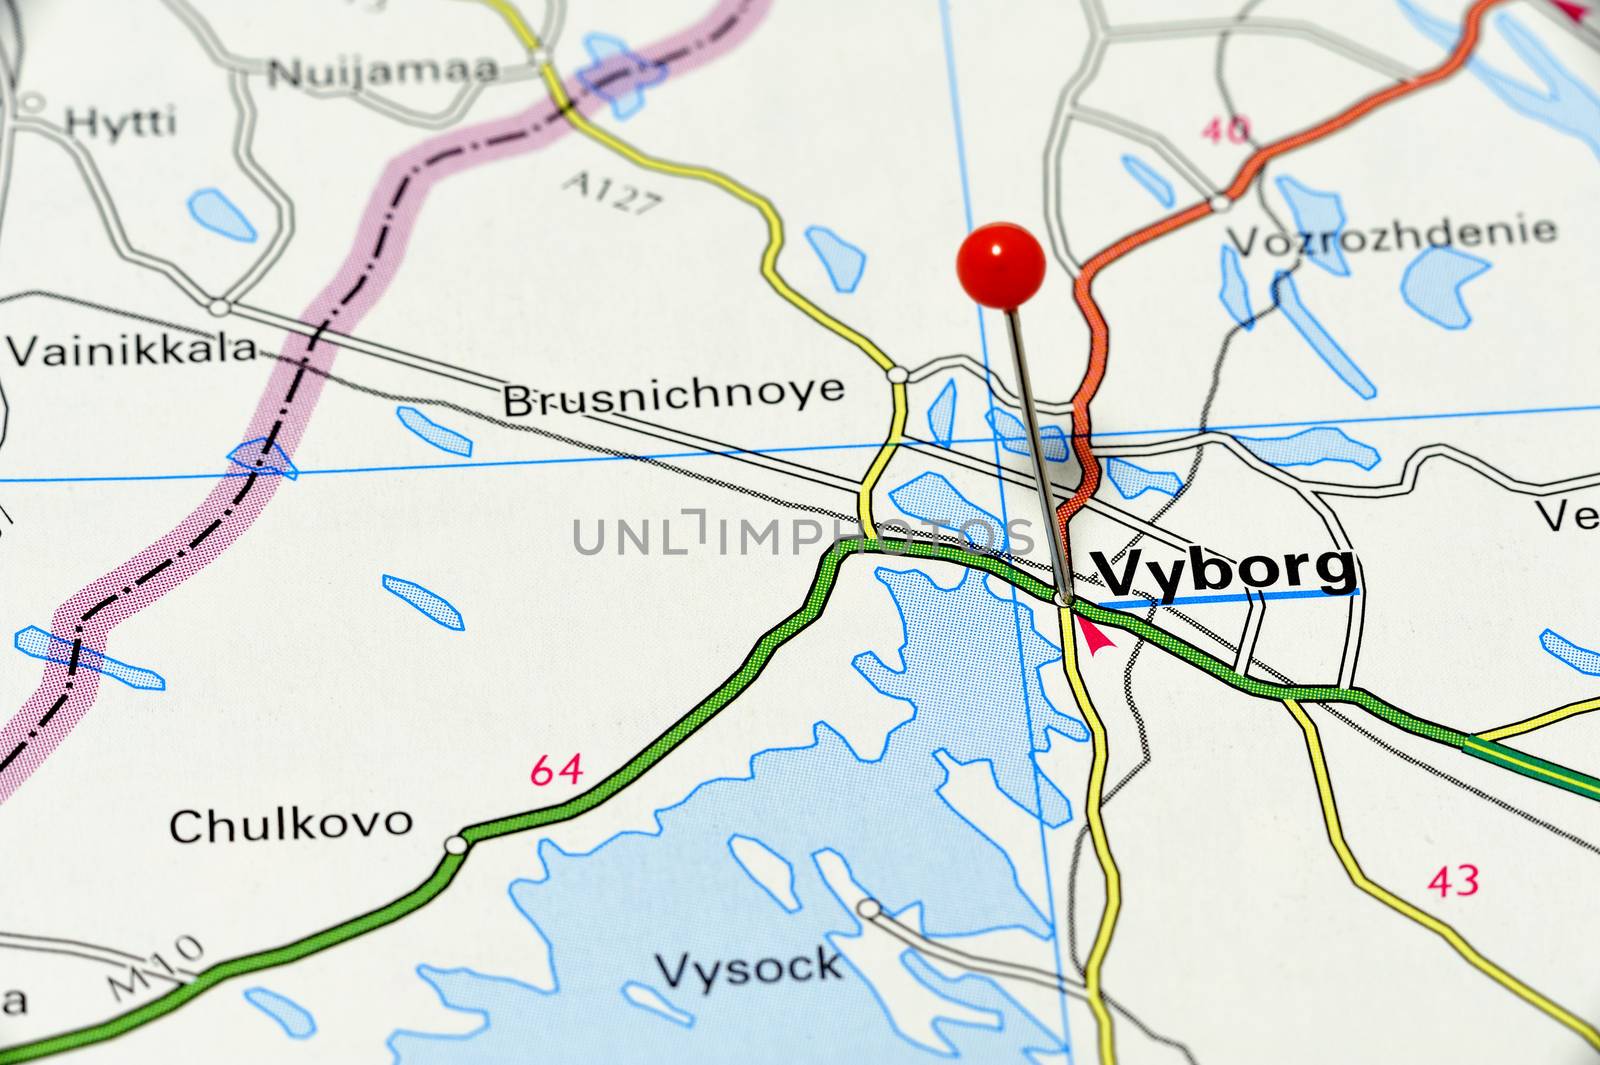 Closeup map of Vyborg. Vyborg a city in Russia.